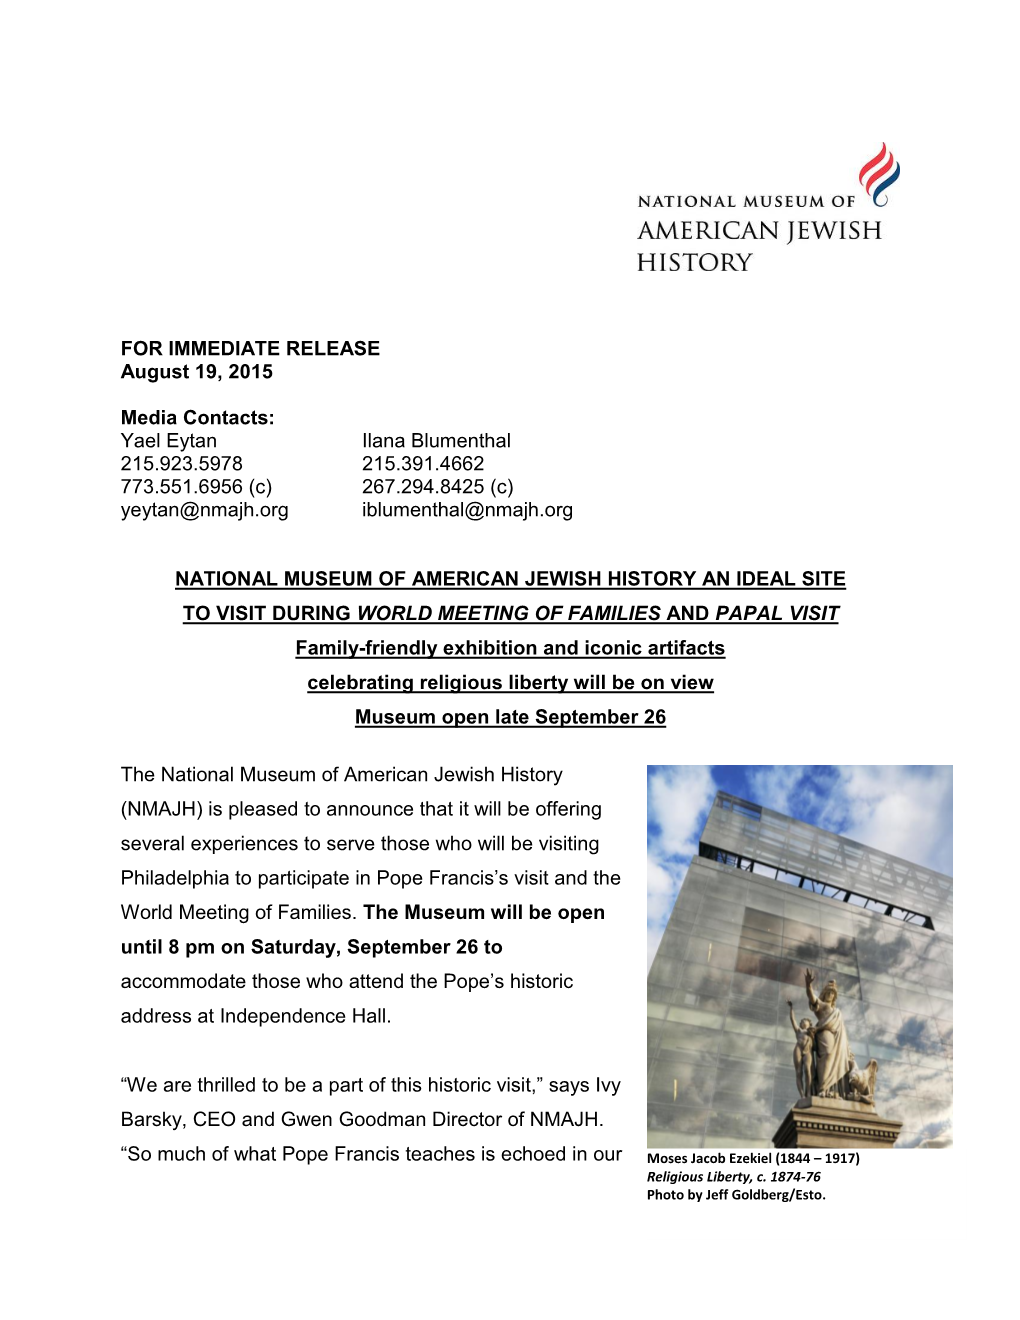 FOR IMMEDIATE RELEASE August 19, 2015 Media Contacts: Yael